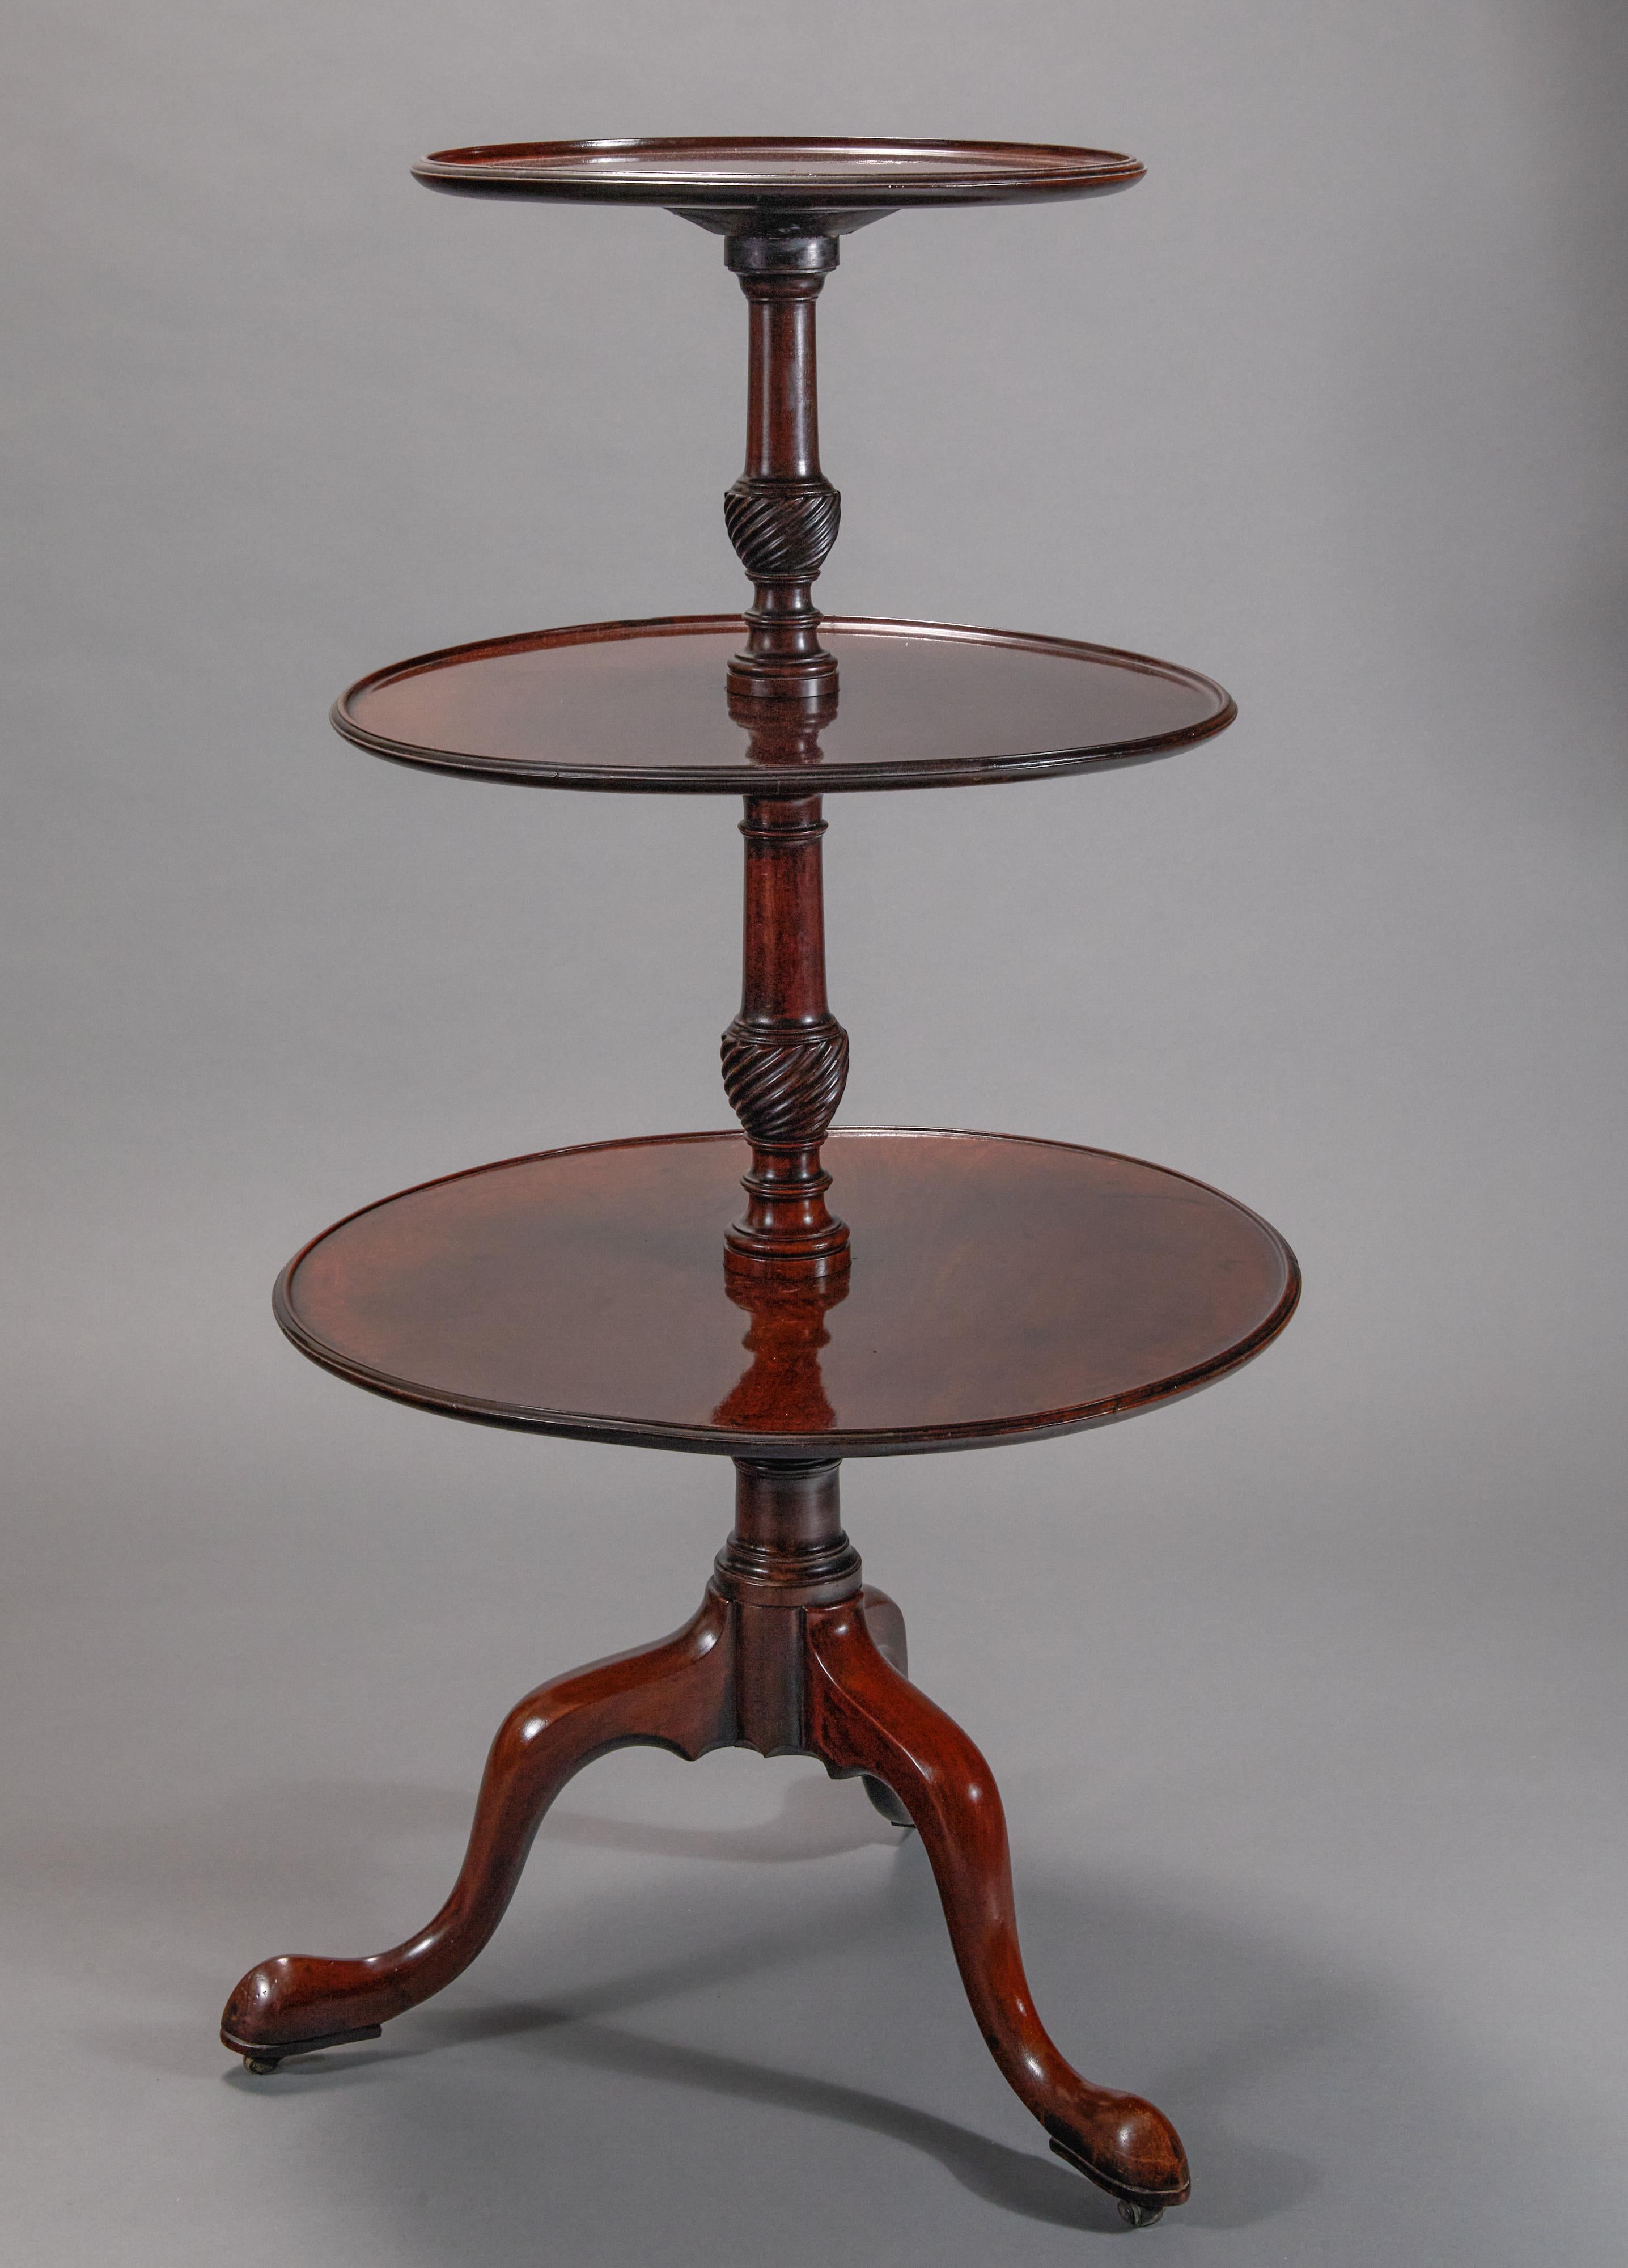 Elegant tripod legs with original castors.  Antique dumb waiters, sometimes referred to as buffets, were made to be used in a dining room for storing food that was about to be served. 